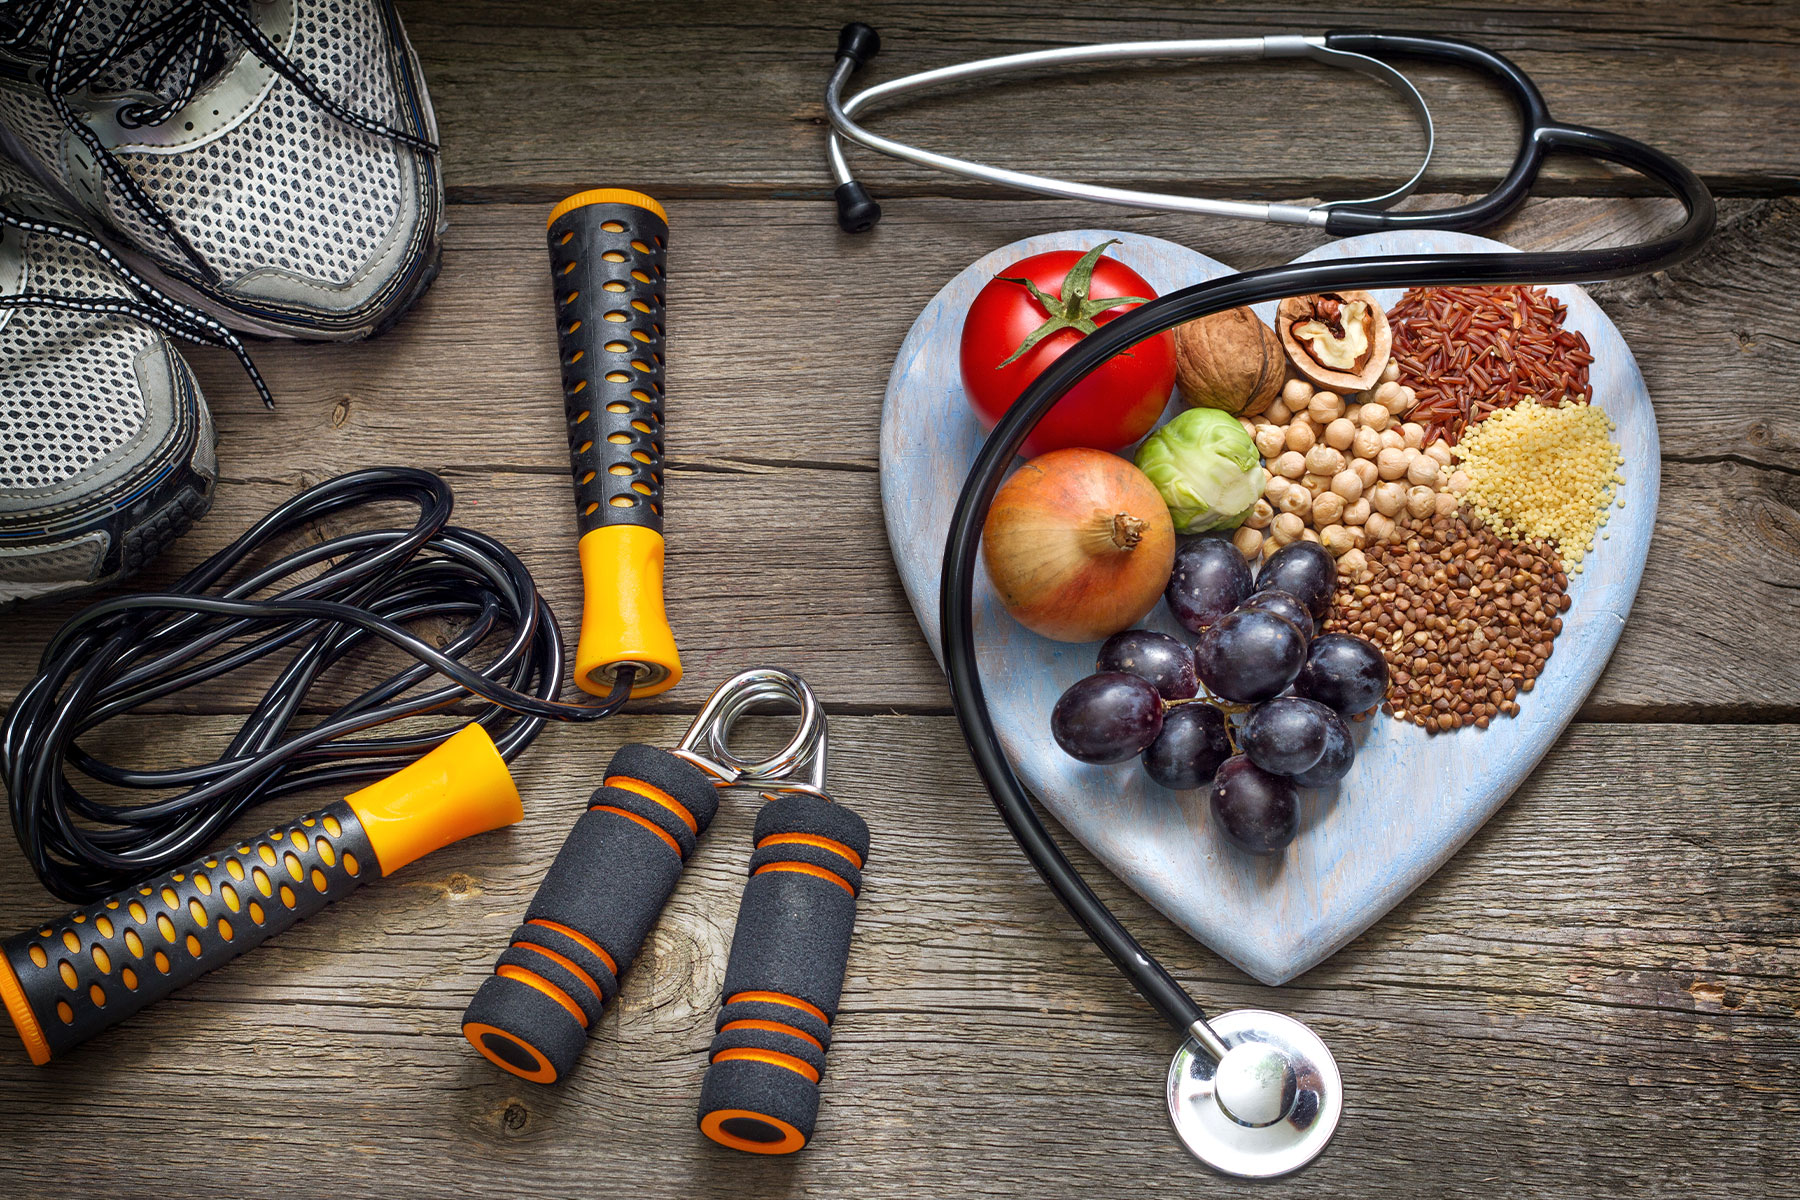 Healthy lifestyle concept with diet and fitness, heart shaped plate with healthy fruit, vegetables. and nuts sitting next to assorted workout gear